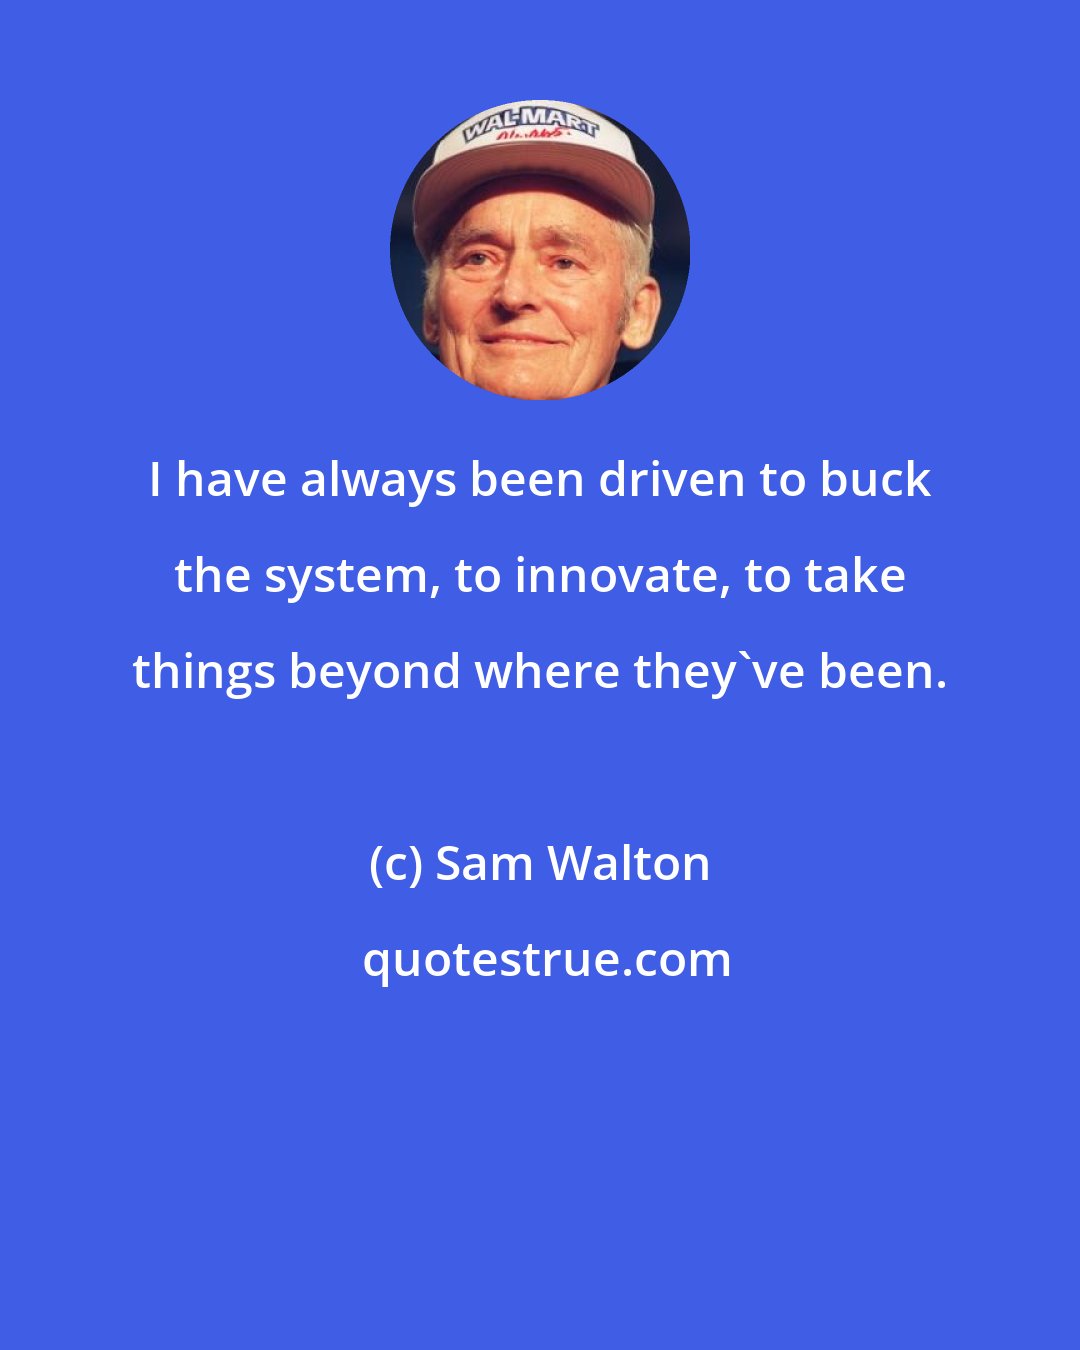 Sam Walton: I have always been driven to buck the system, to innovate, to take things beyond where they've been.